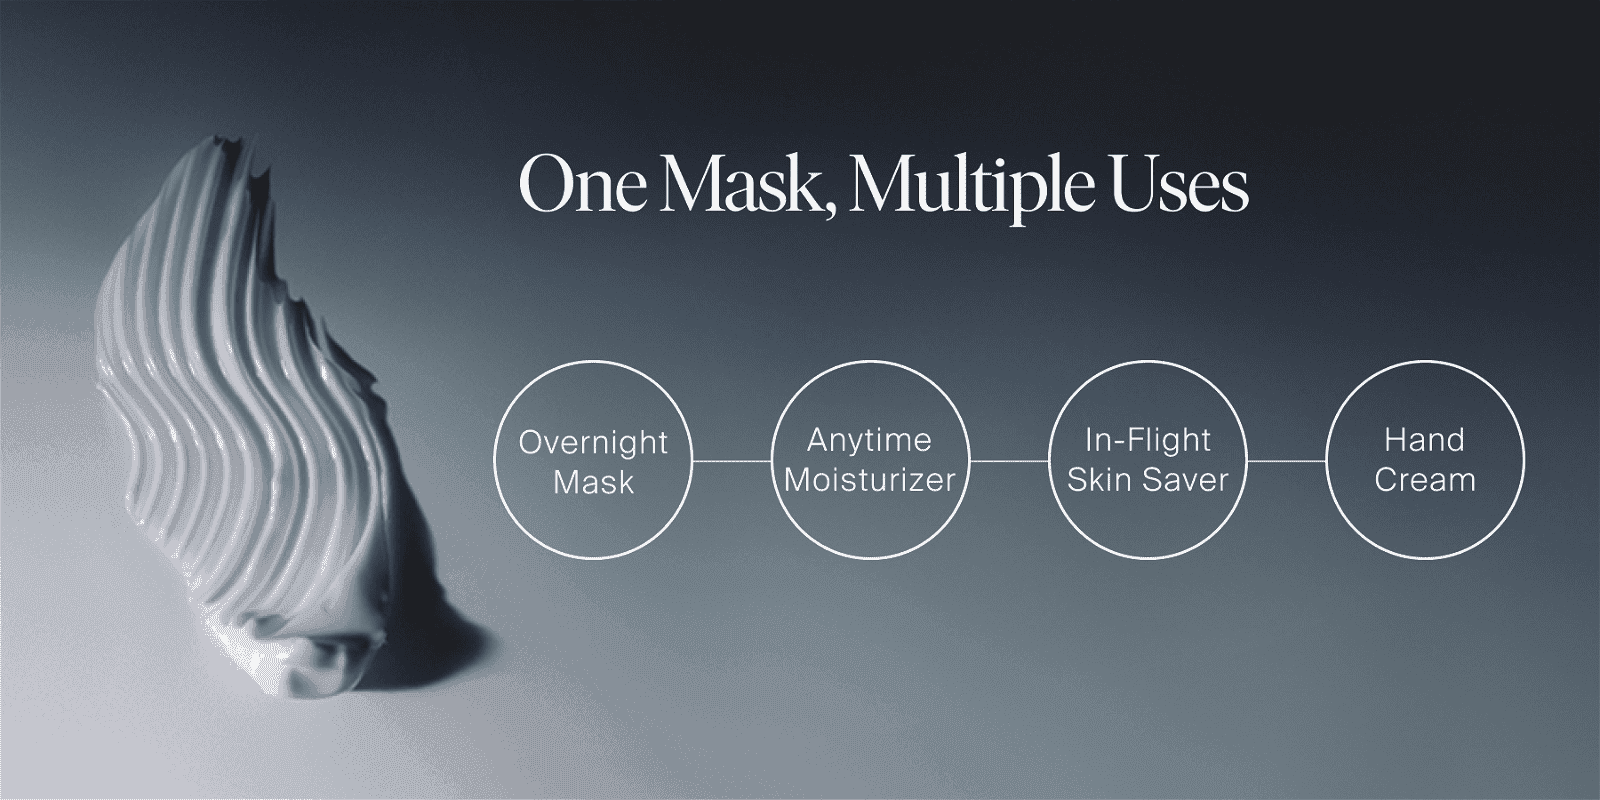 One Mask, Multiple Uses